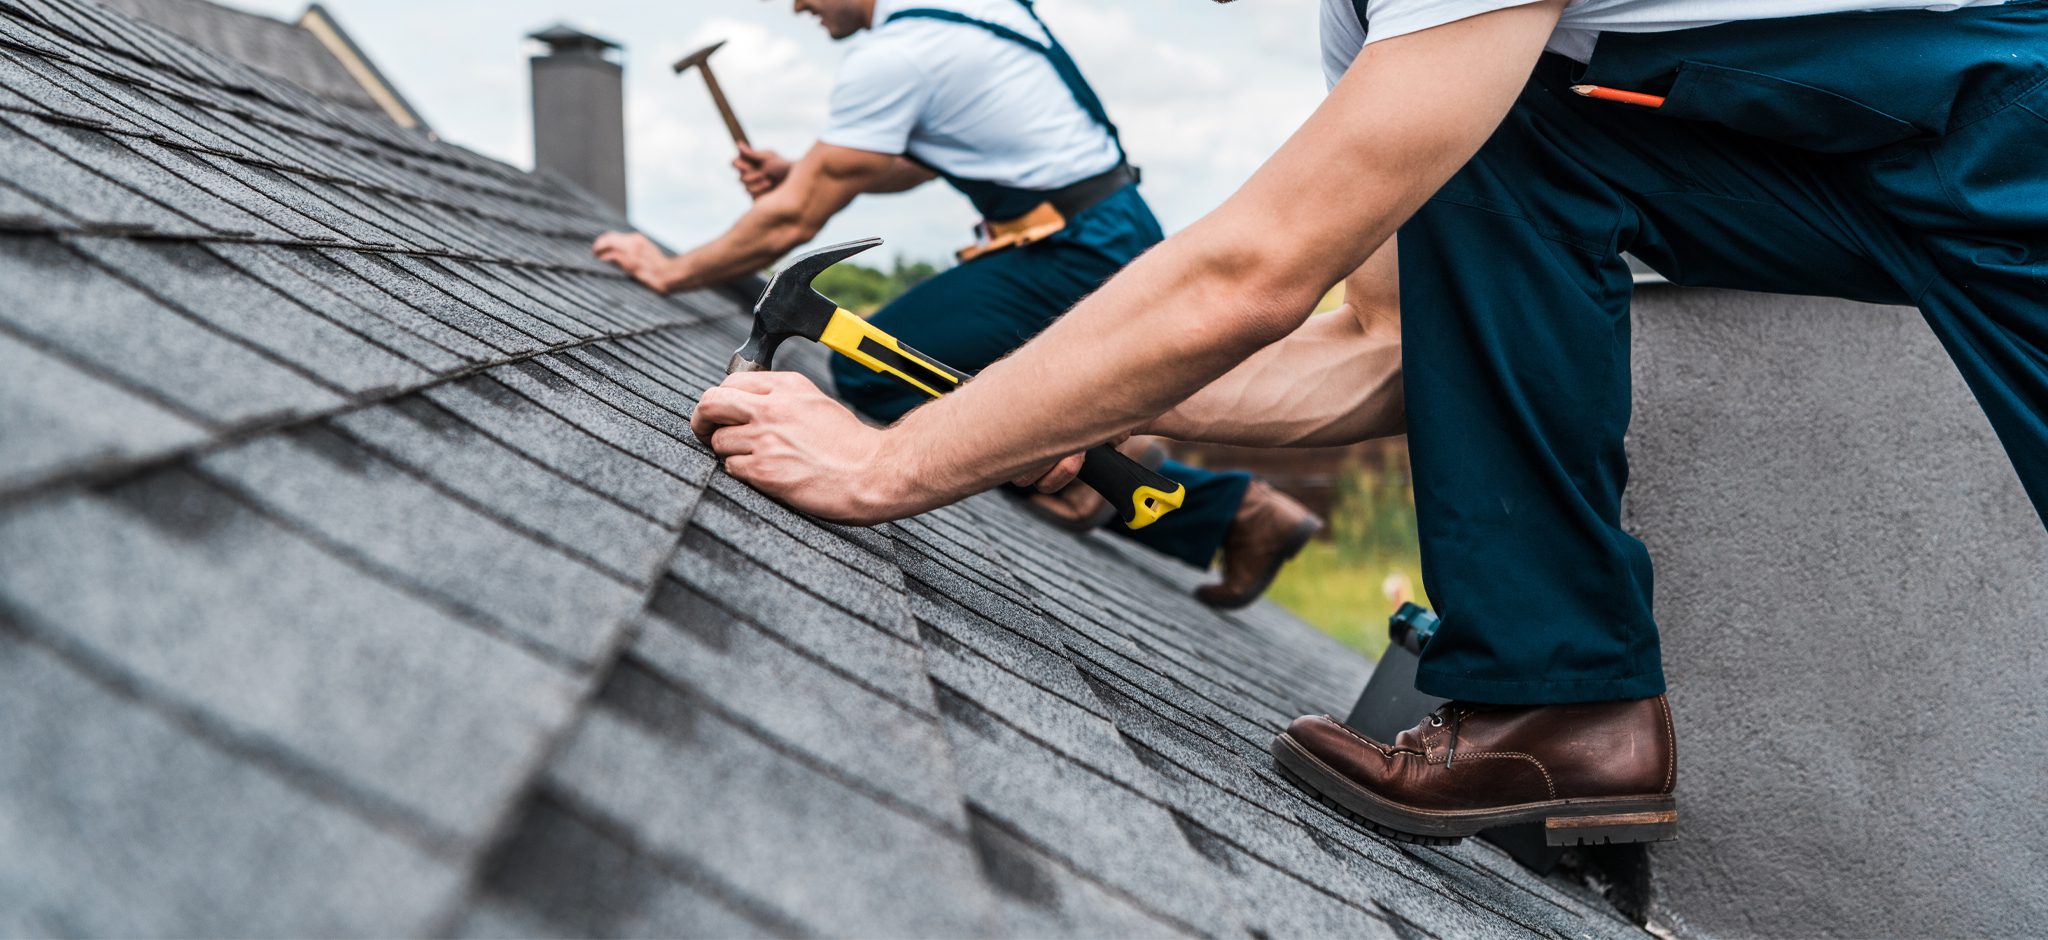 Why You Should Fix Slipped Or Broken Roofing Tiles Immediately